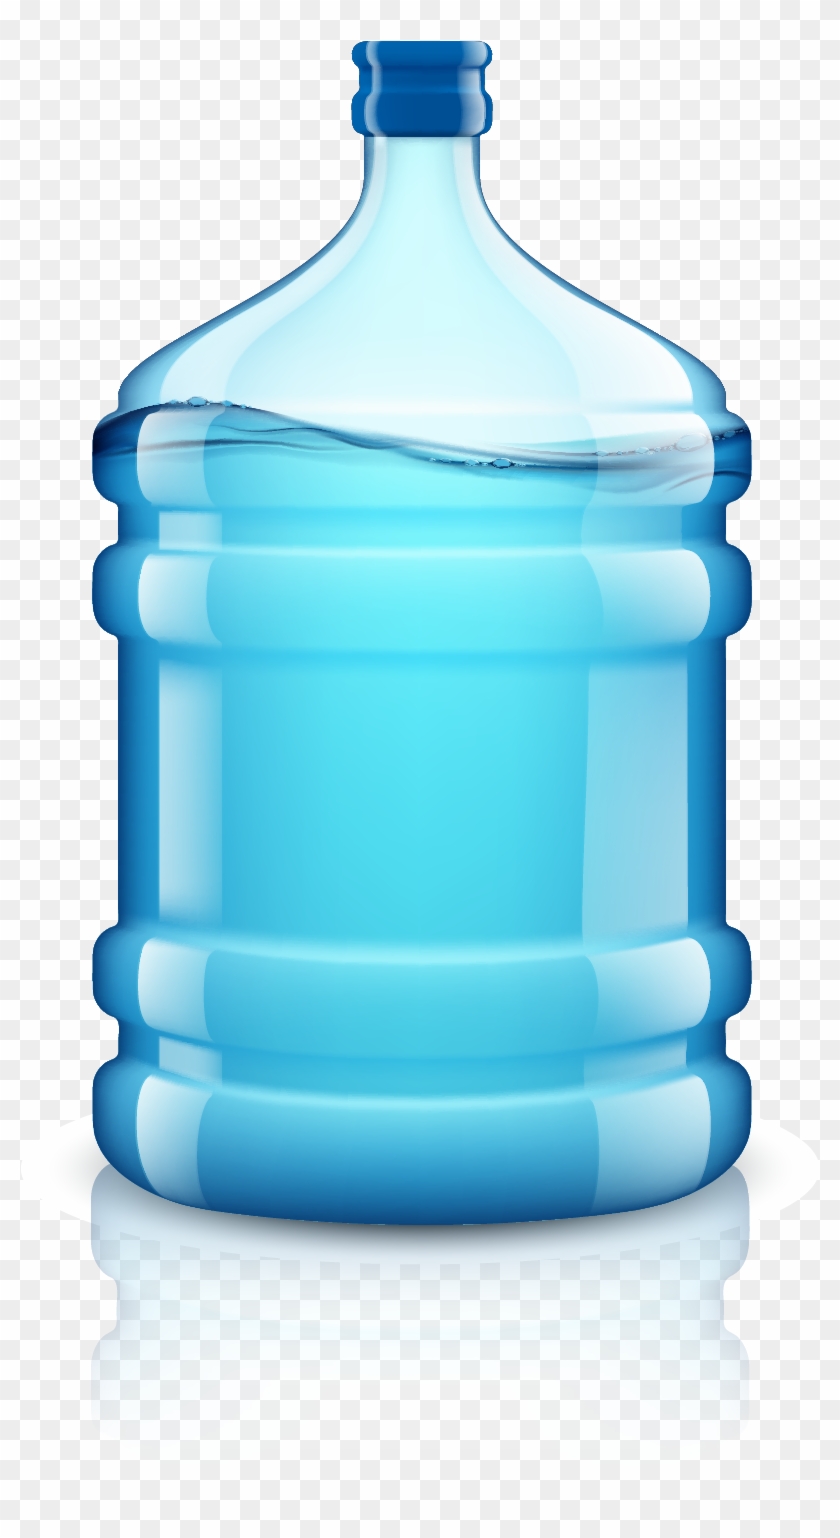 Drinking Water Bottle Euclidean Vector Plastic - Pure Water Png #1243591